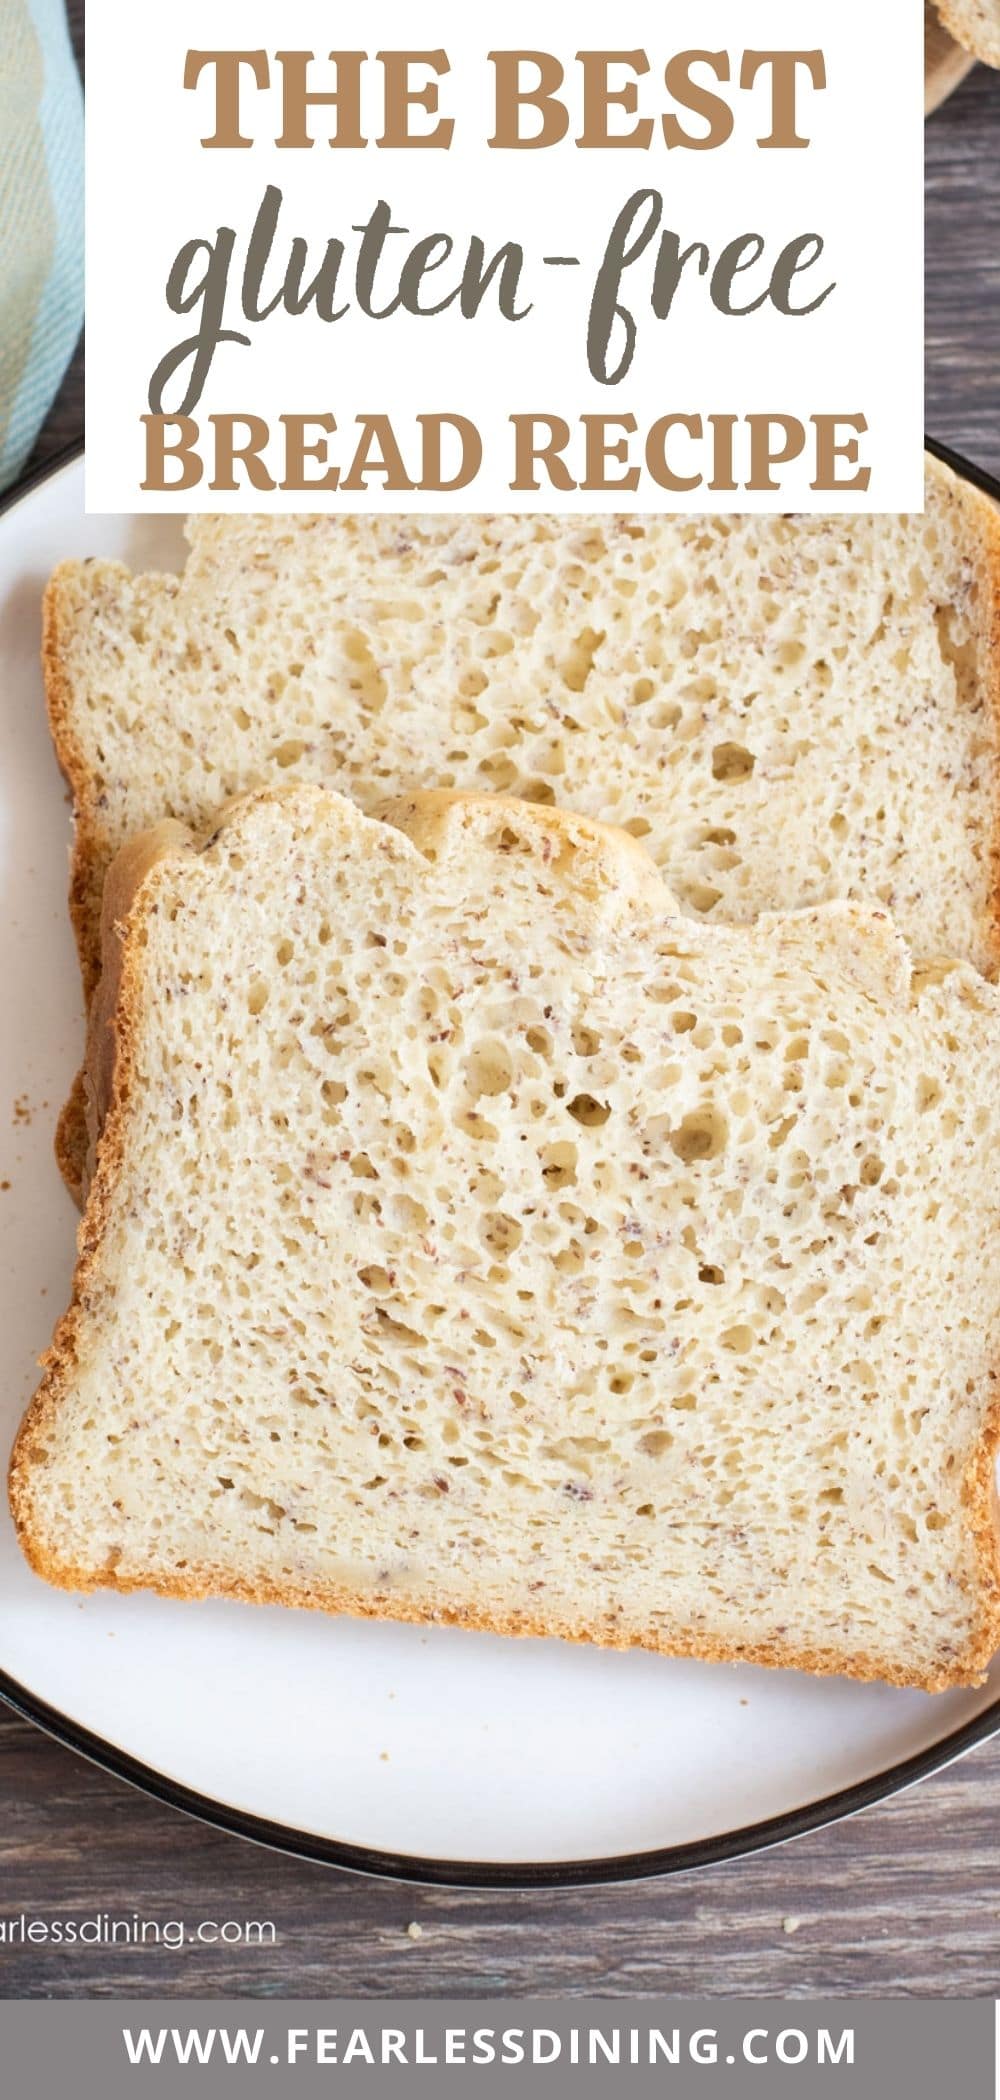 Bake the Best Gluten Free Bread with Your Bread Machine - Fearless Dining